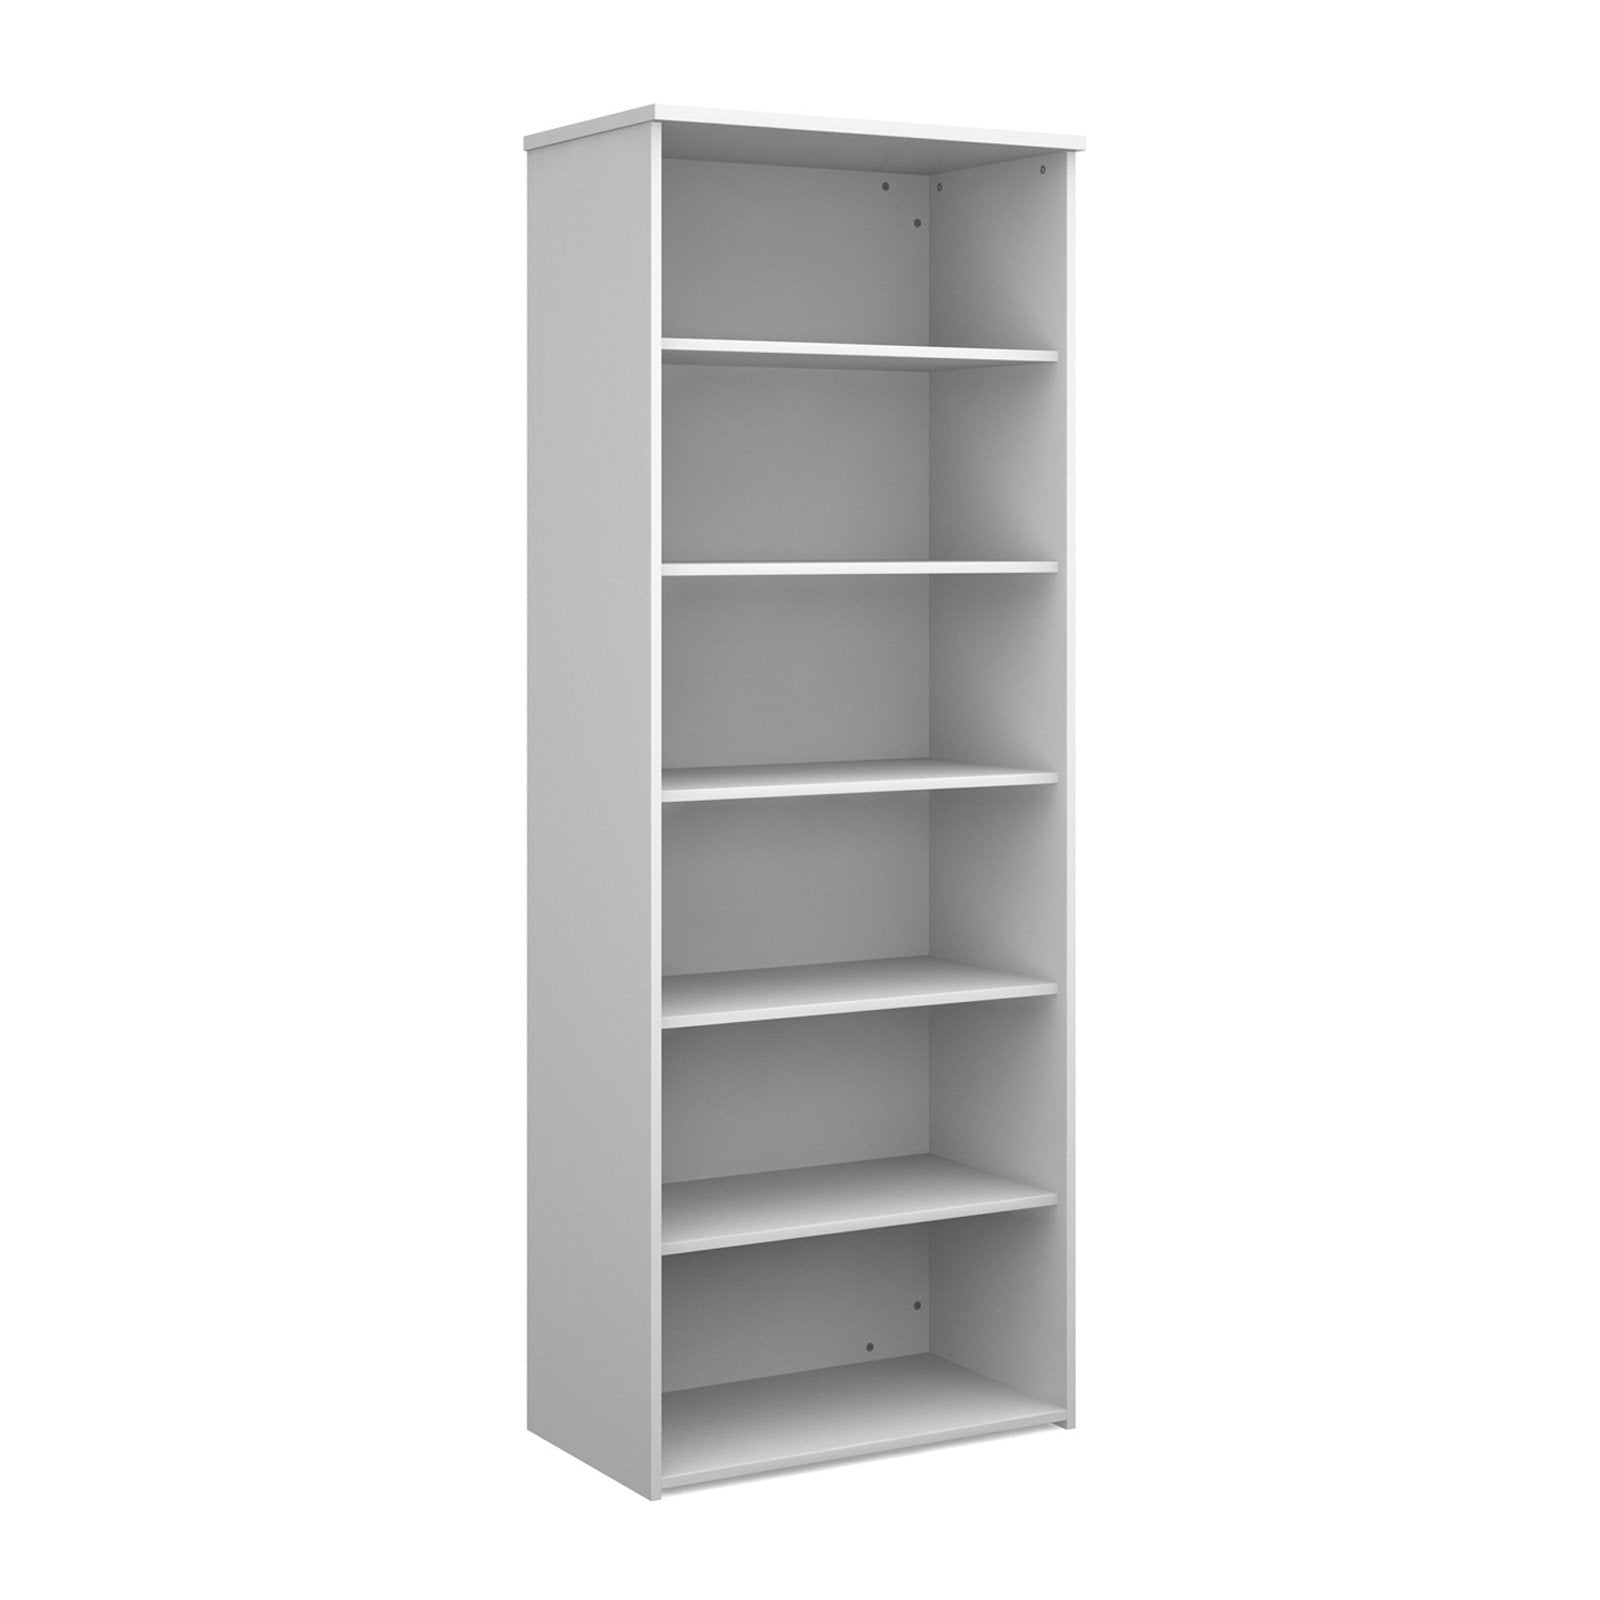 Universal bookcase - Office Products Online